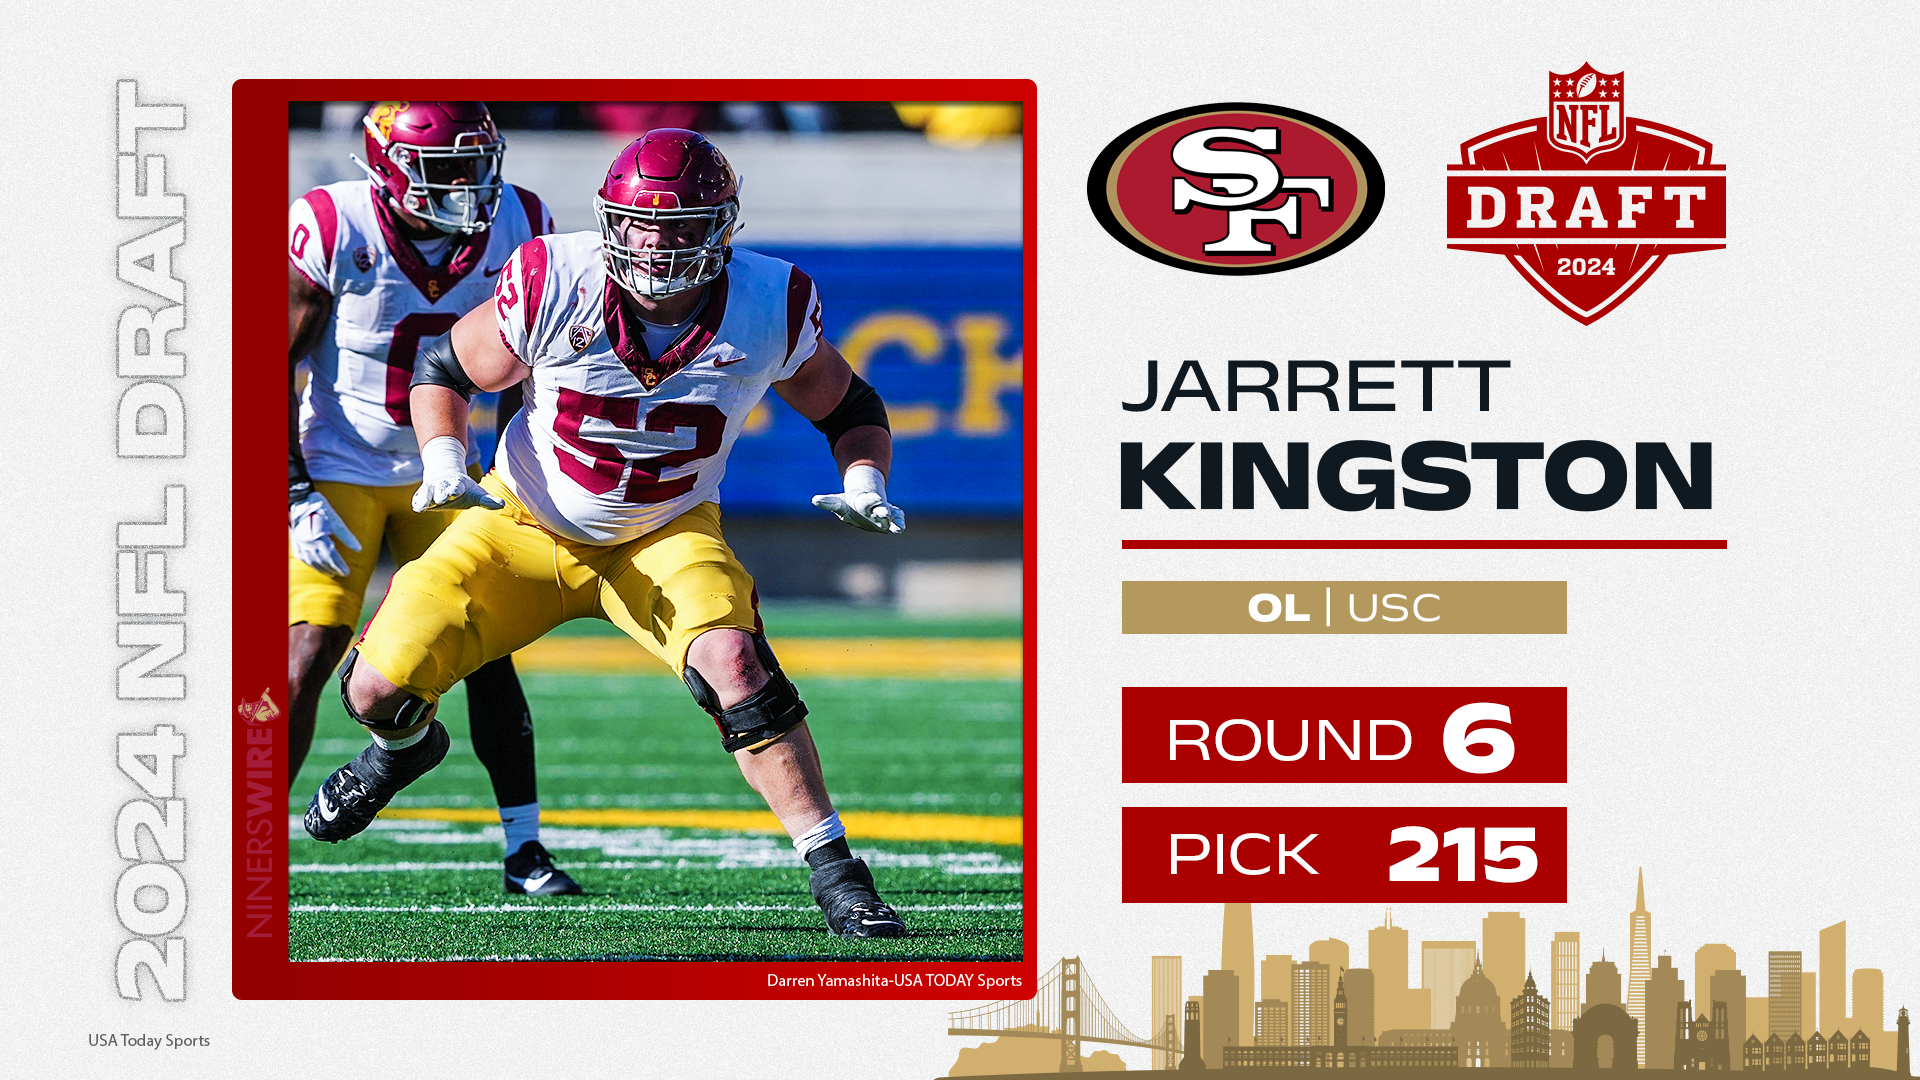 Why Jarrett Kingston could be an unexpected NFL draft gem for 49ers